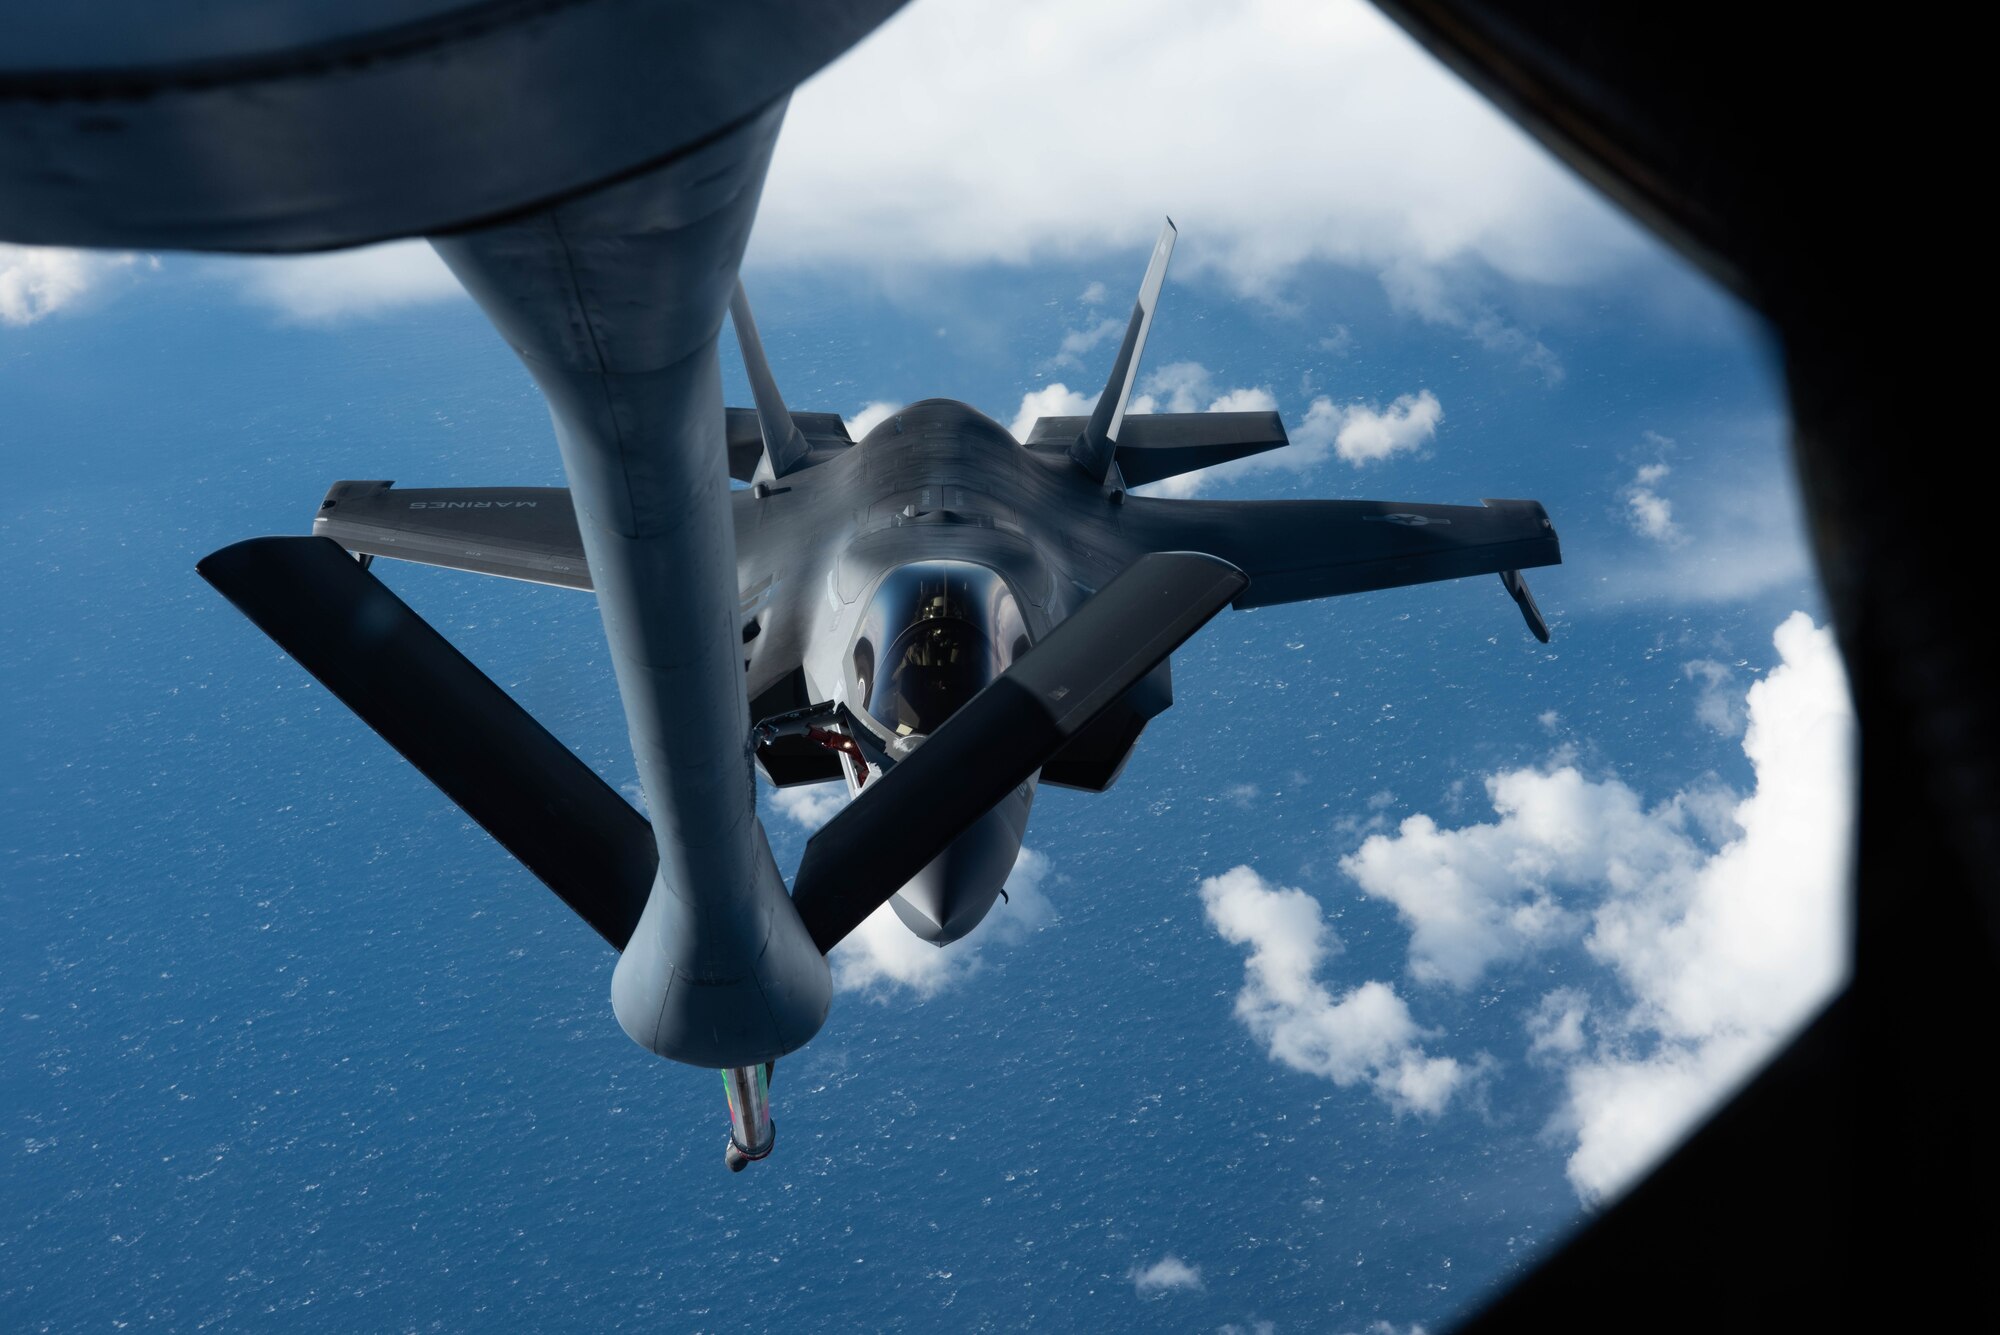 A jet approaches an aircraft for refueling.